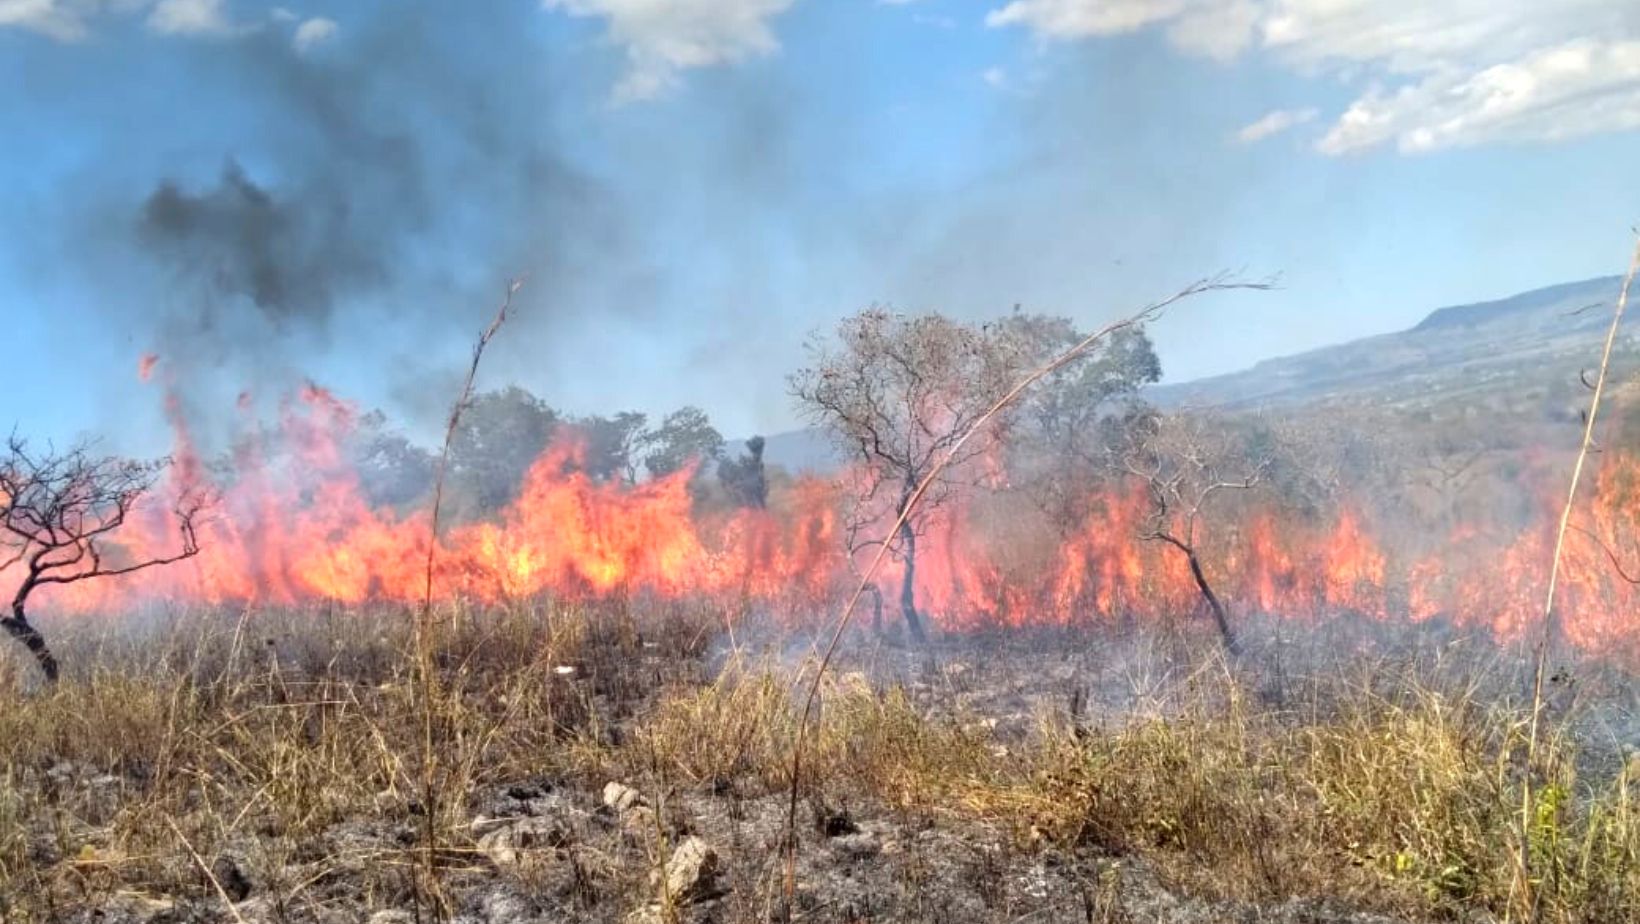 More than 50 fires were registered in Tuxtla Gutiérrez in the first months of 2023. (Chiapas Civil Protection)